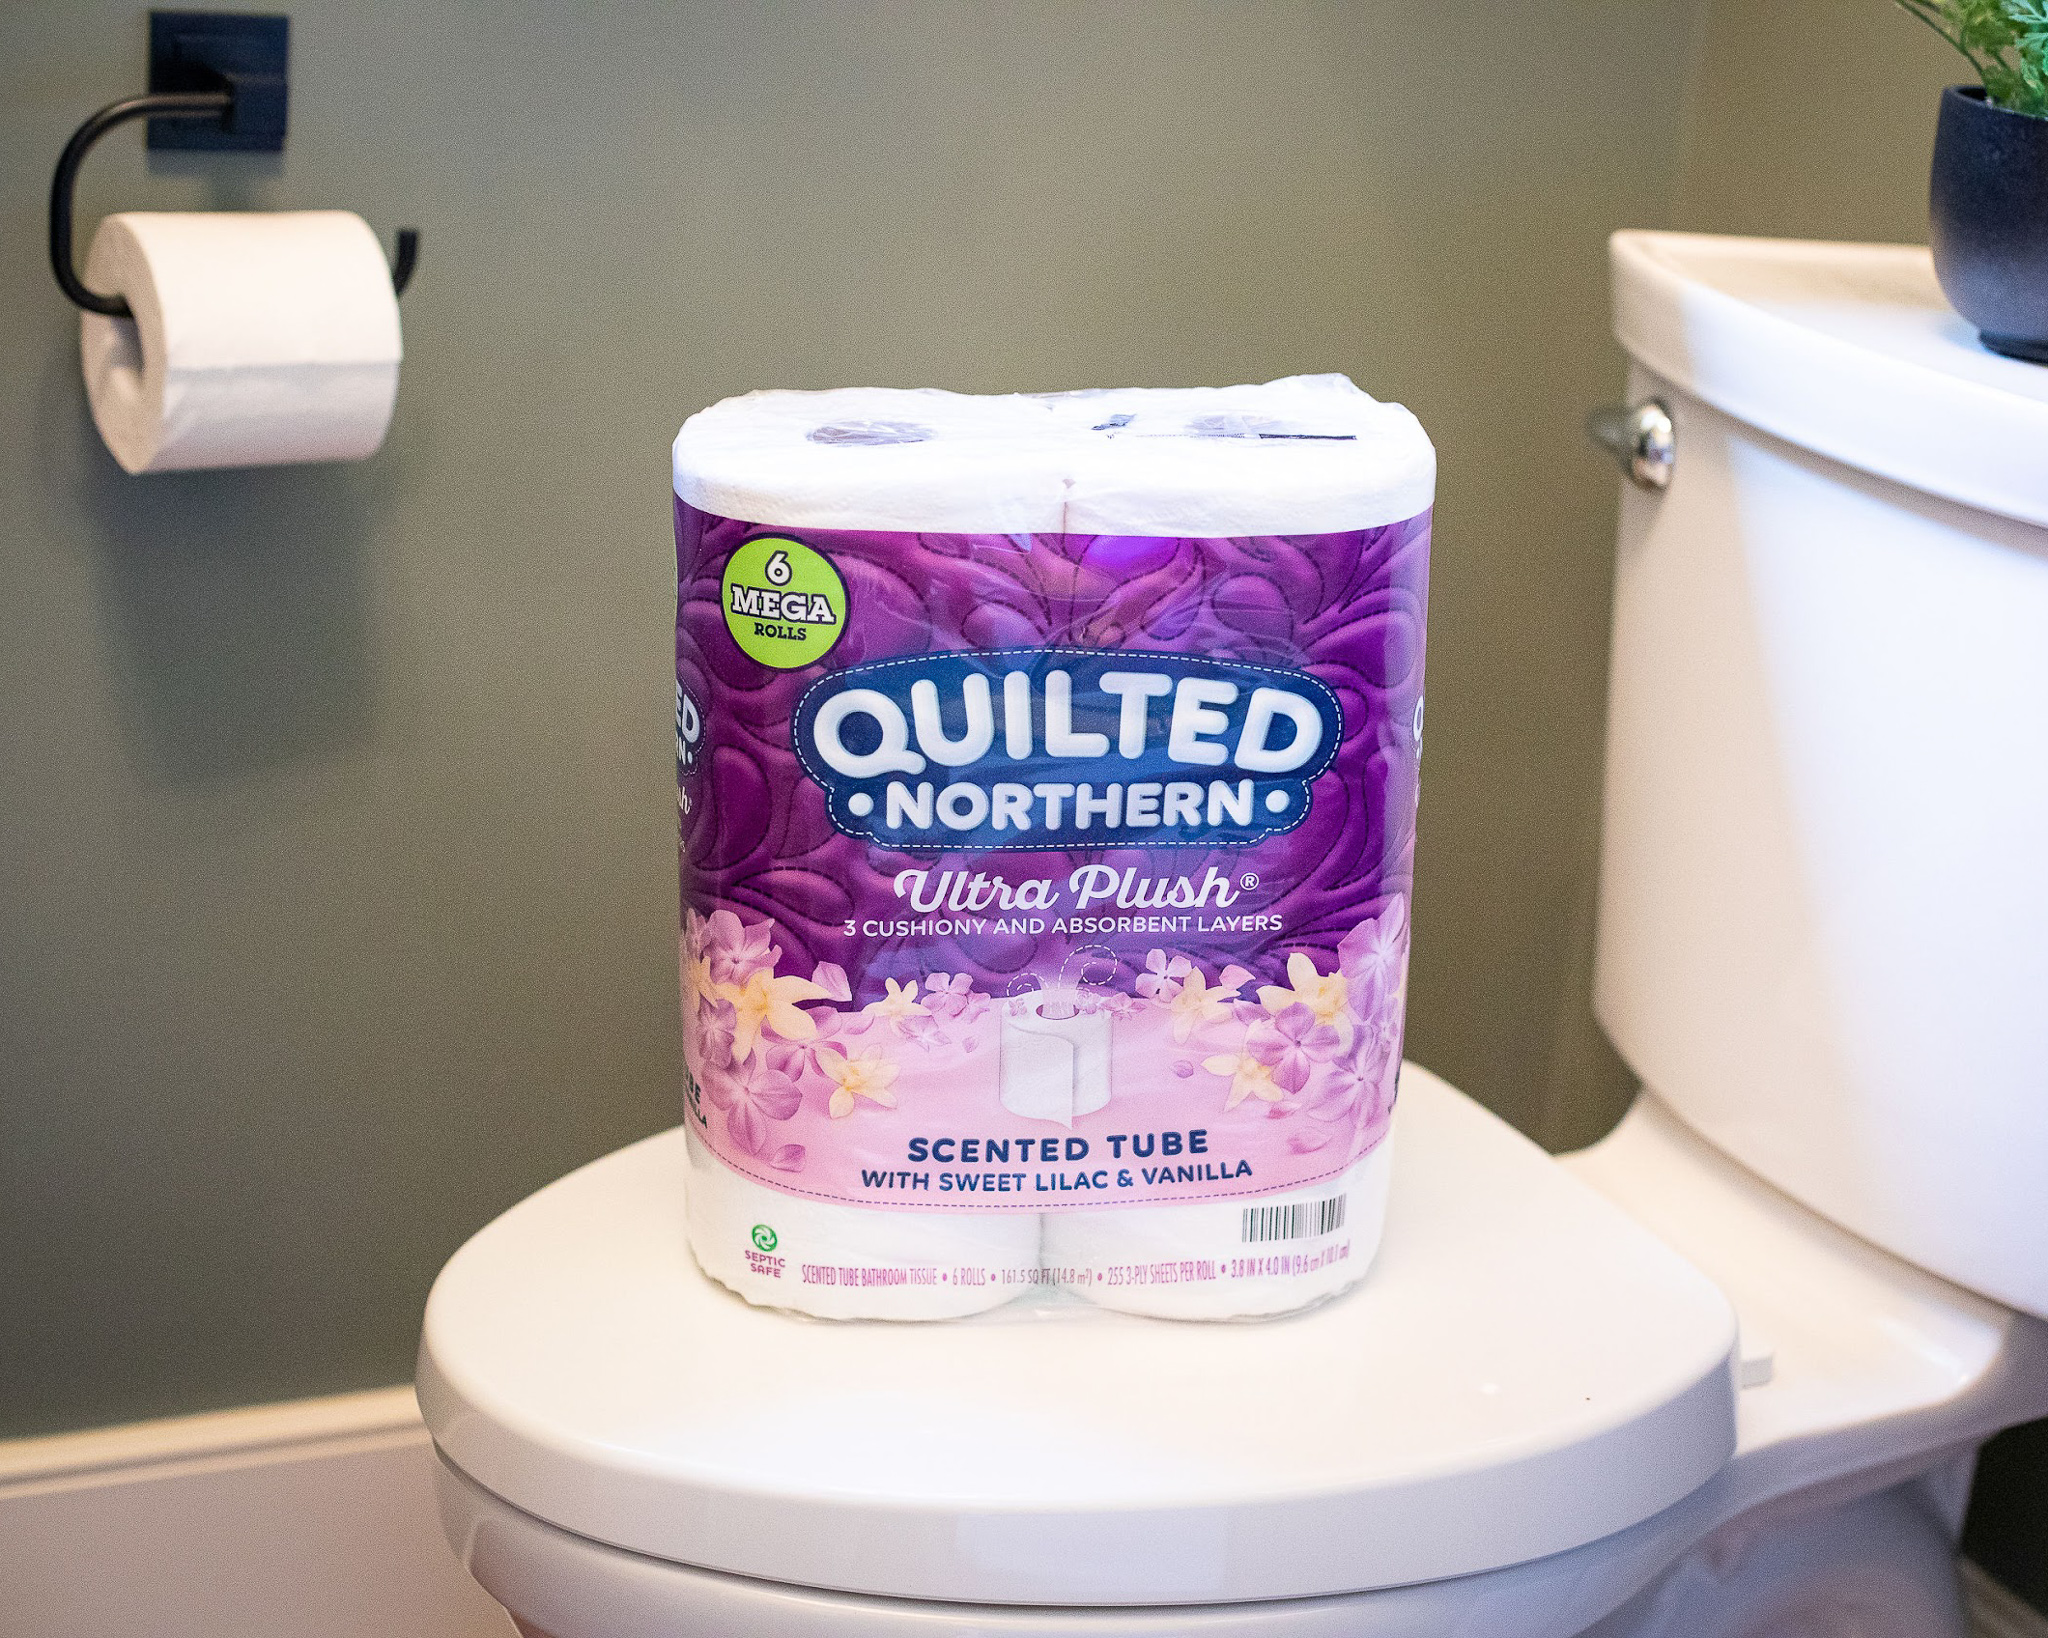 Quilted Northern Bathroom Tissue Just $5.49 At Publix (Regular Price $9.99)